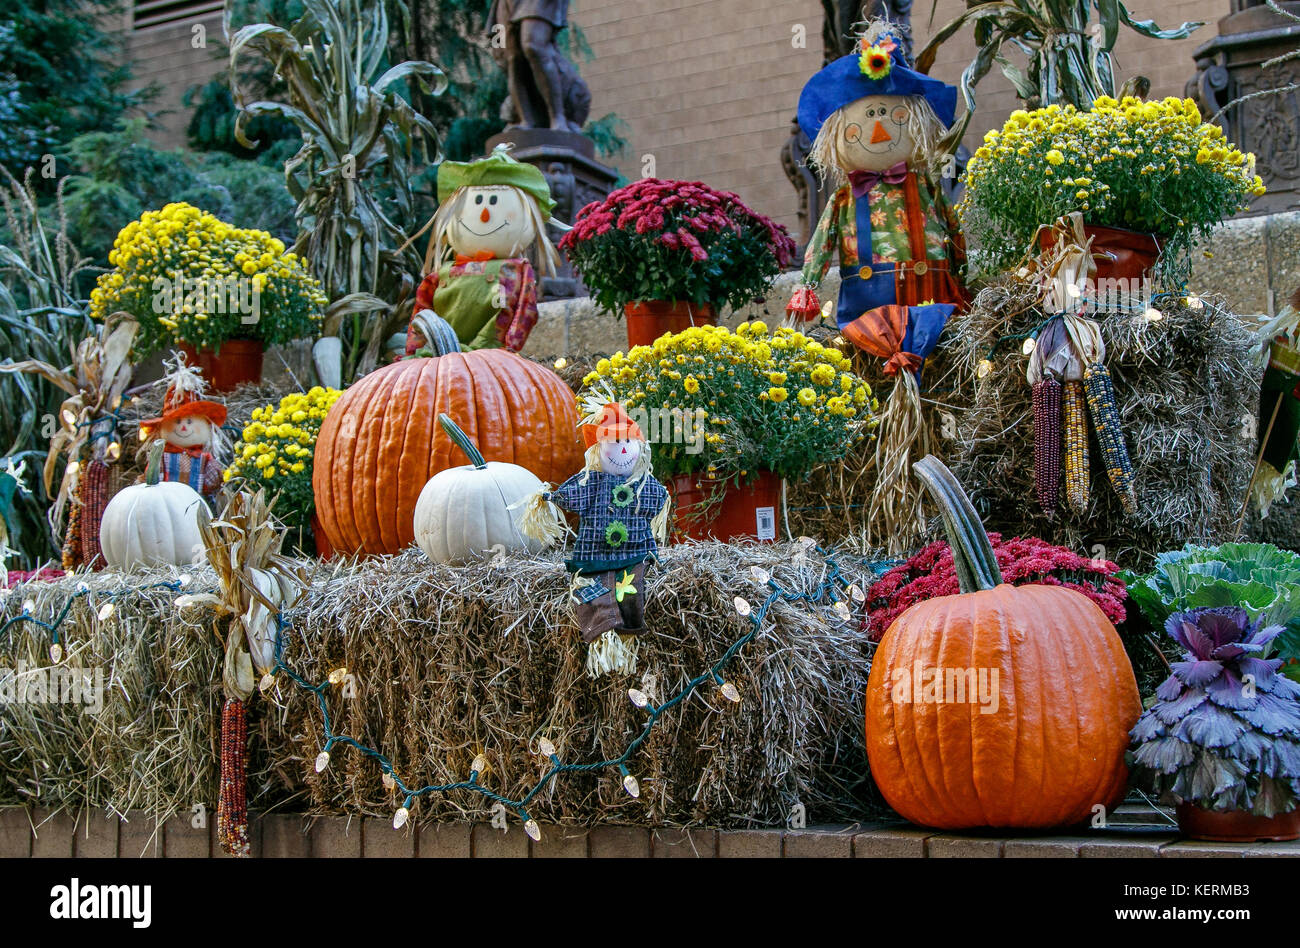 Halloween decoration with pumpkins, cloth scarecrows, hay, lights and pots of flowers. Stock Photo